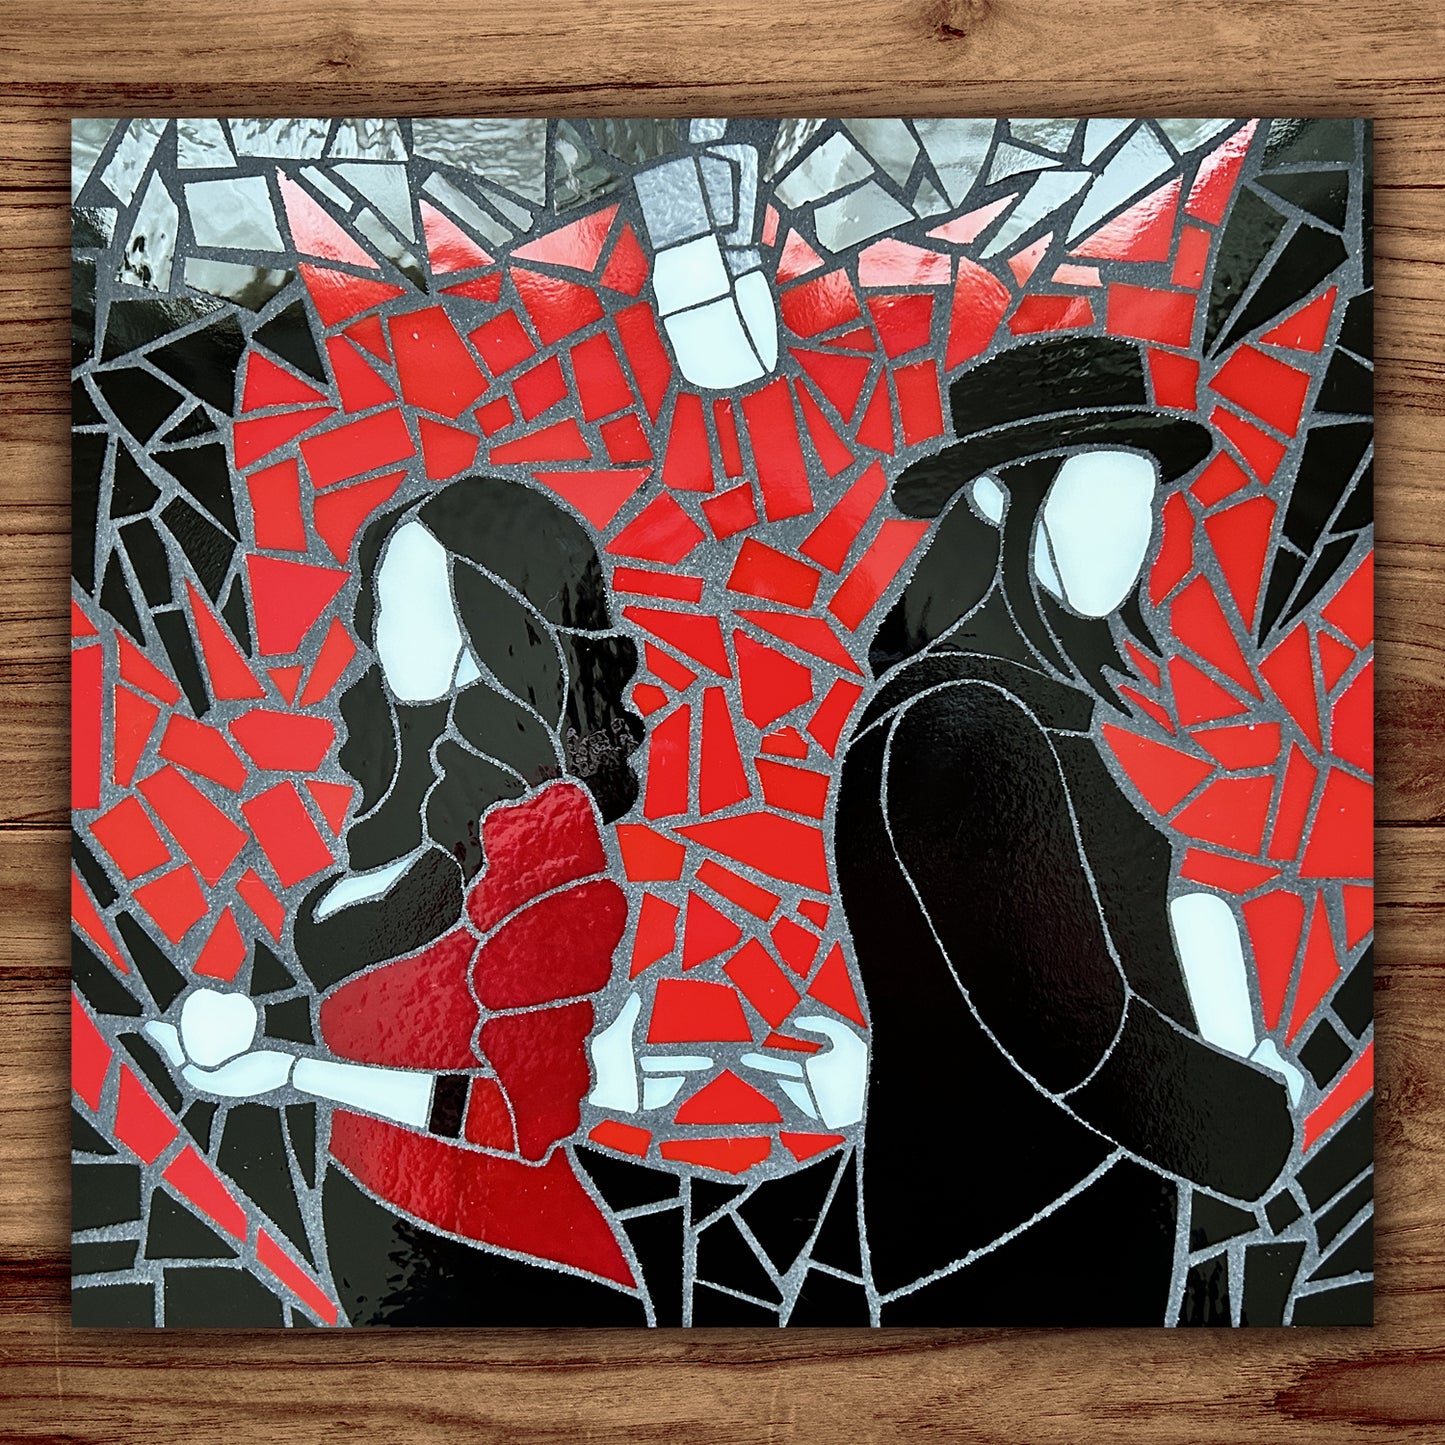 The White Stripes Stained Glass Mosaic